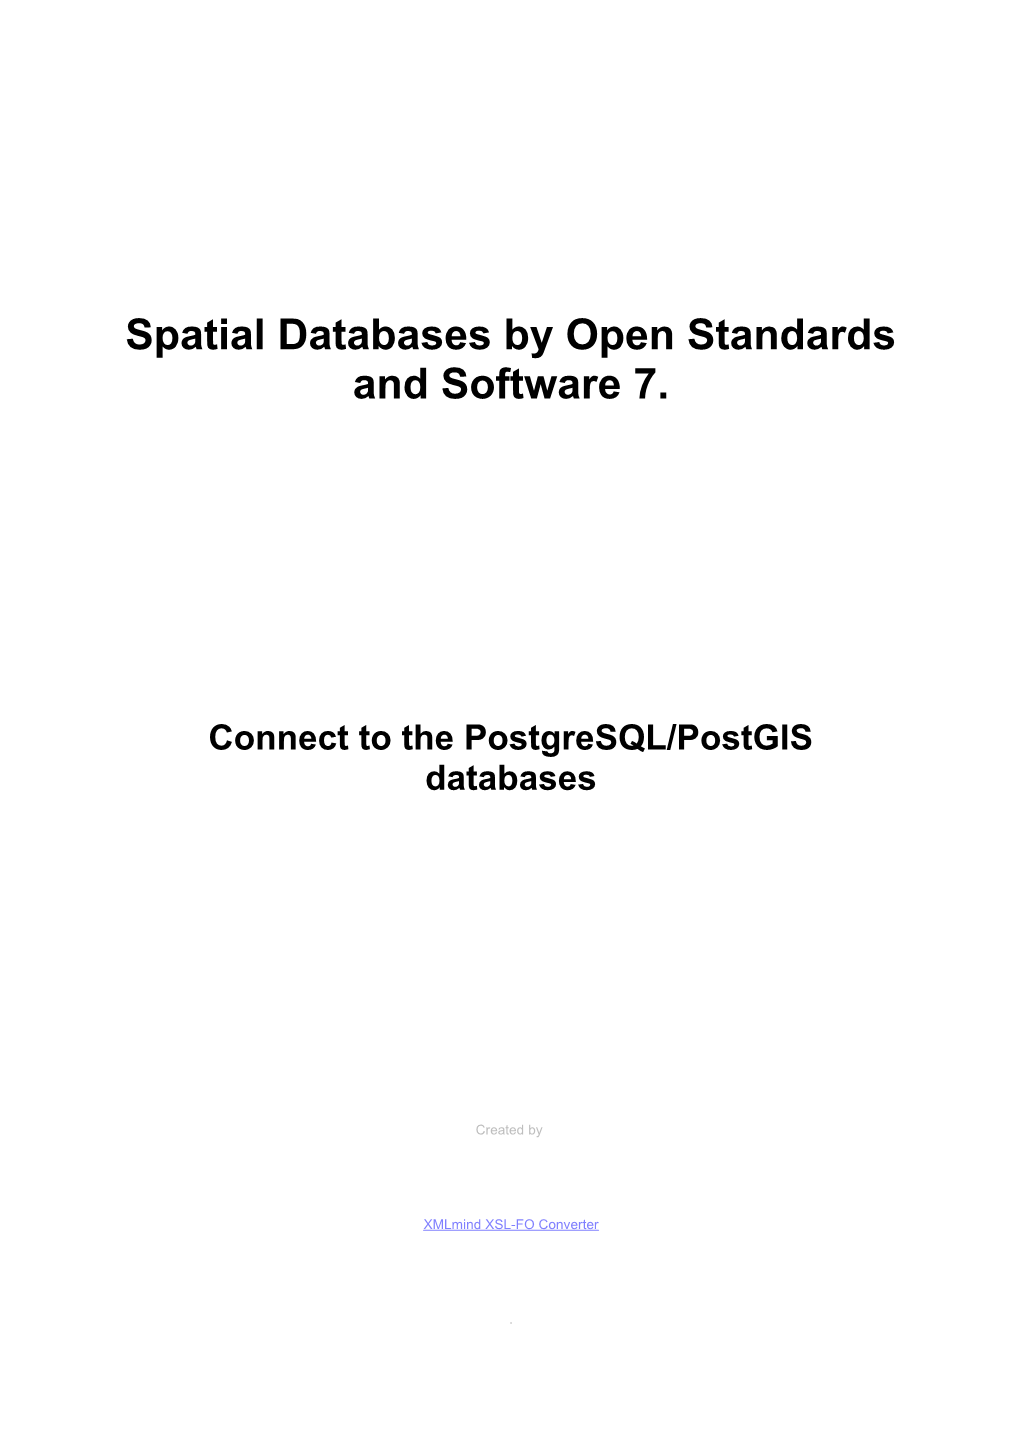 Spatial Databases by Open Standards and Software 7